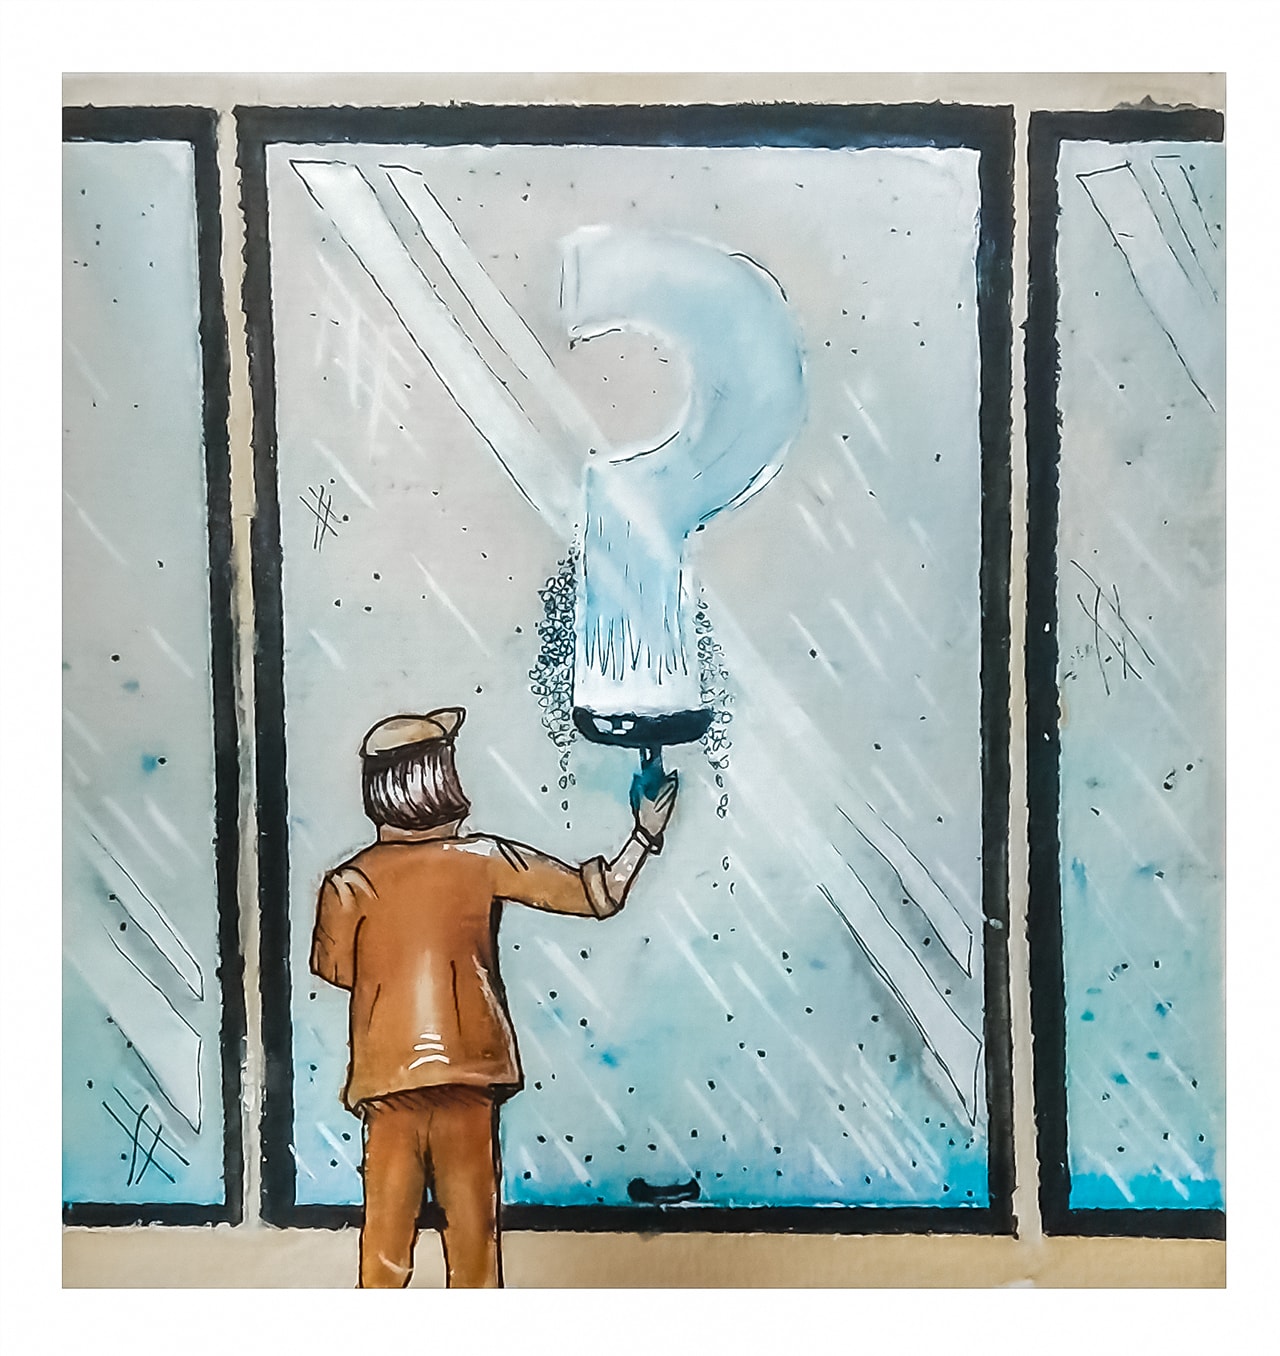 Artwork a person cleaning a glass window forming a question mark shape | Artwork by Hiran Madiya